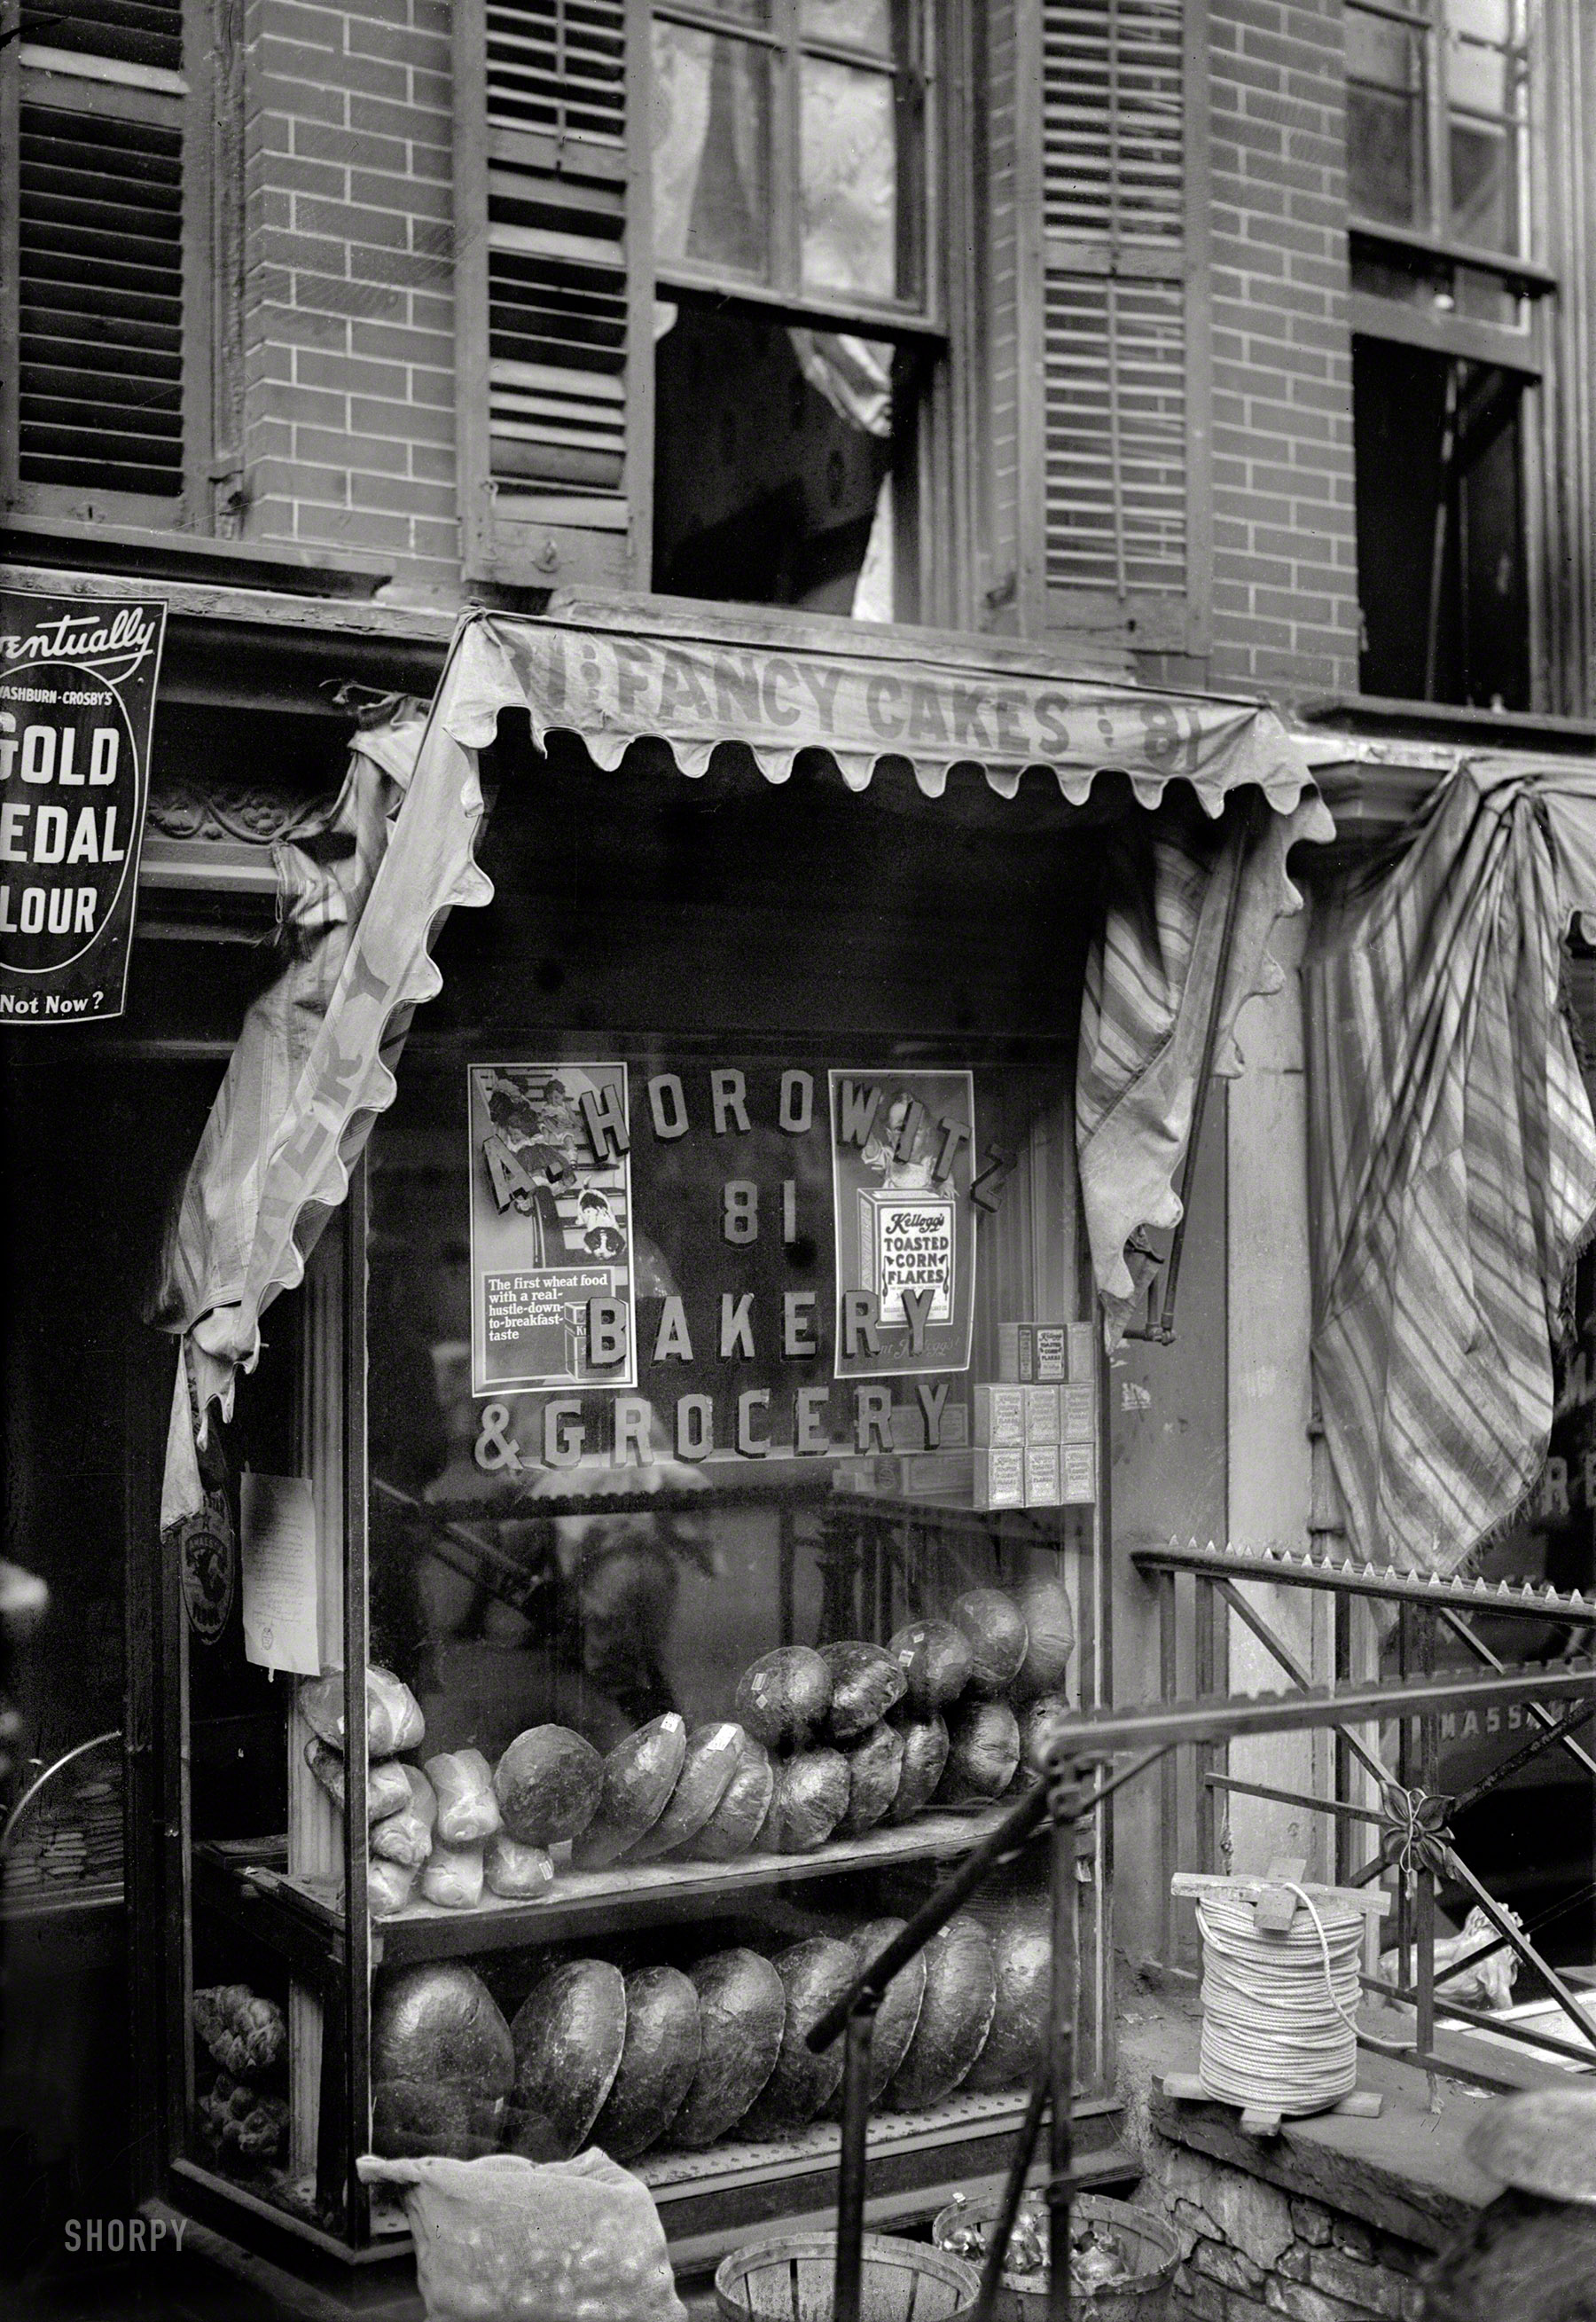 New York circa 1910, somewhere on the Lower East Side. "Bread for the poor." 5x7 glass negative, George Grantham Bain Collection. View full size.